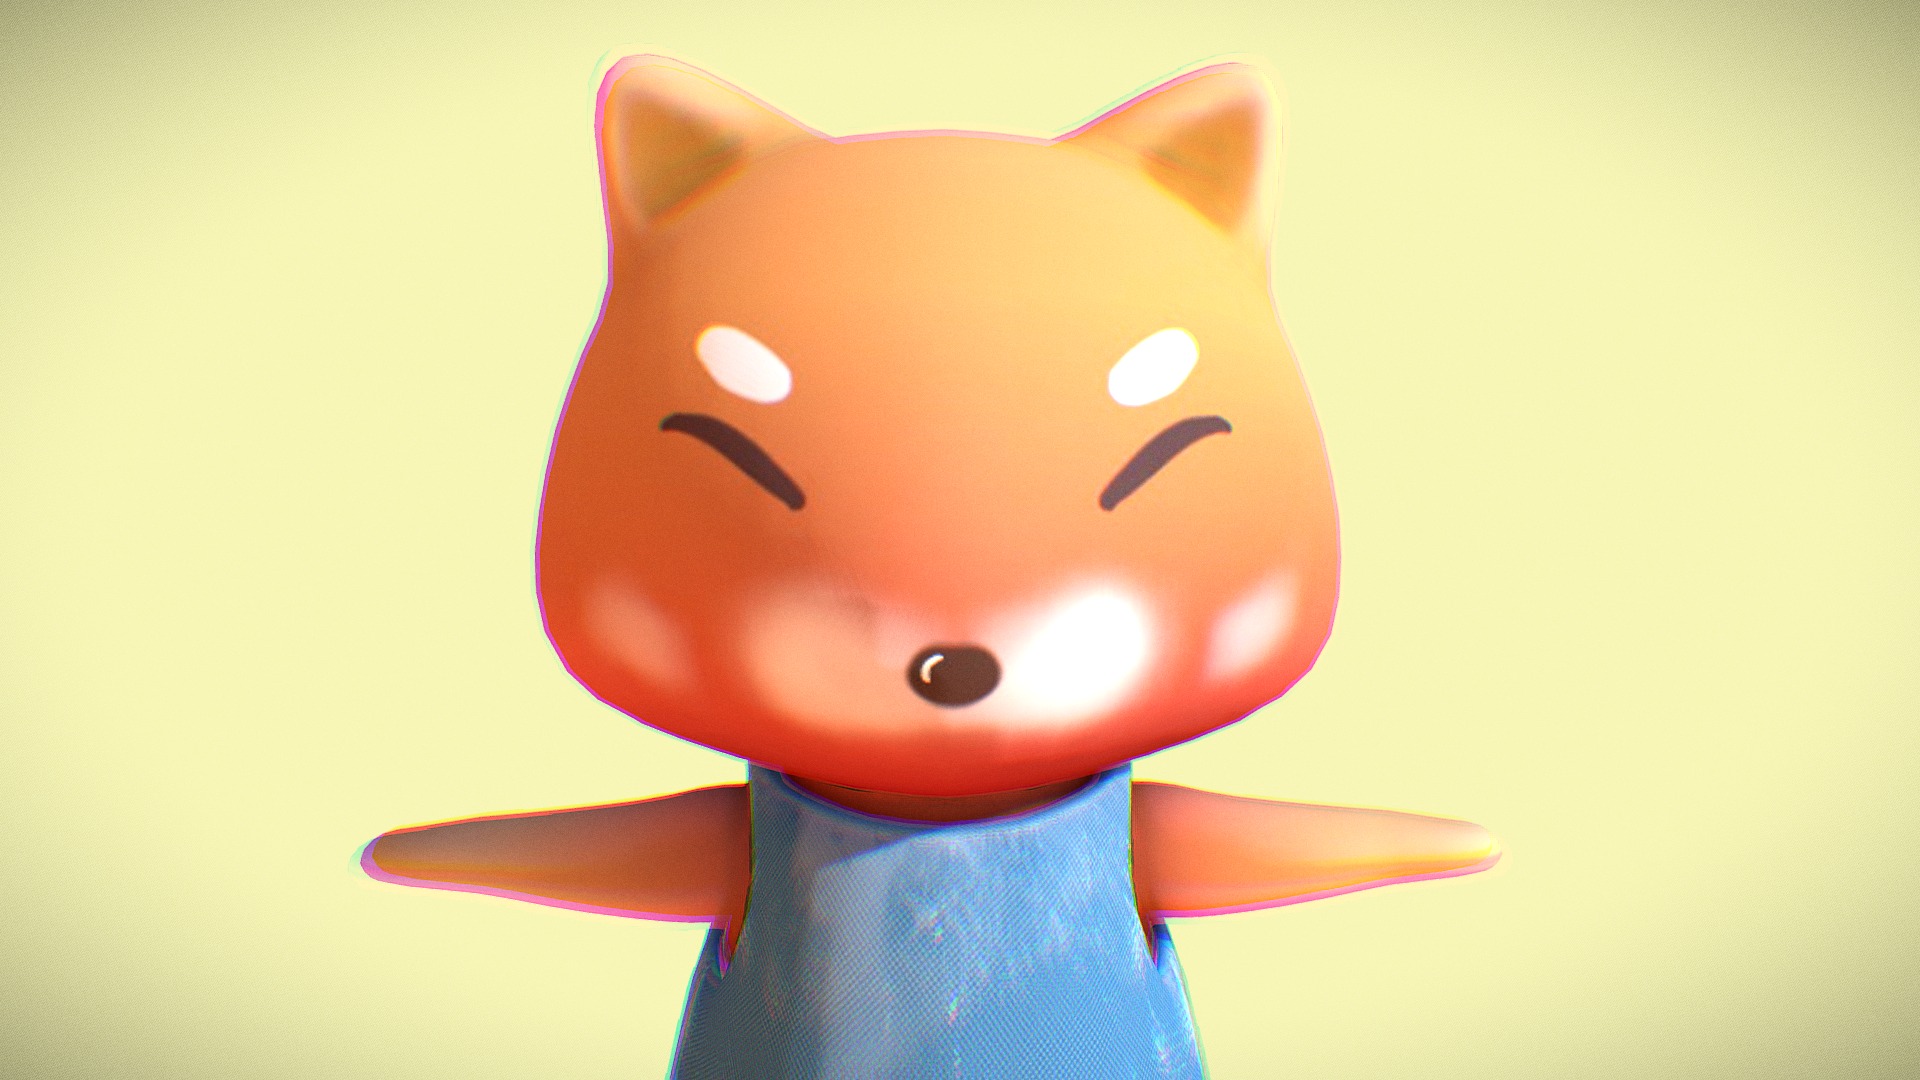 3D model Chiba Inu - This is a 3D model of the Chiba Inu. The 3D model is about a red cartoon character.